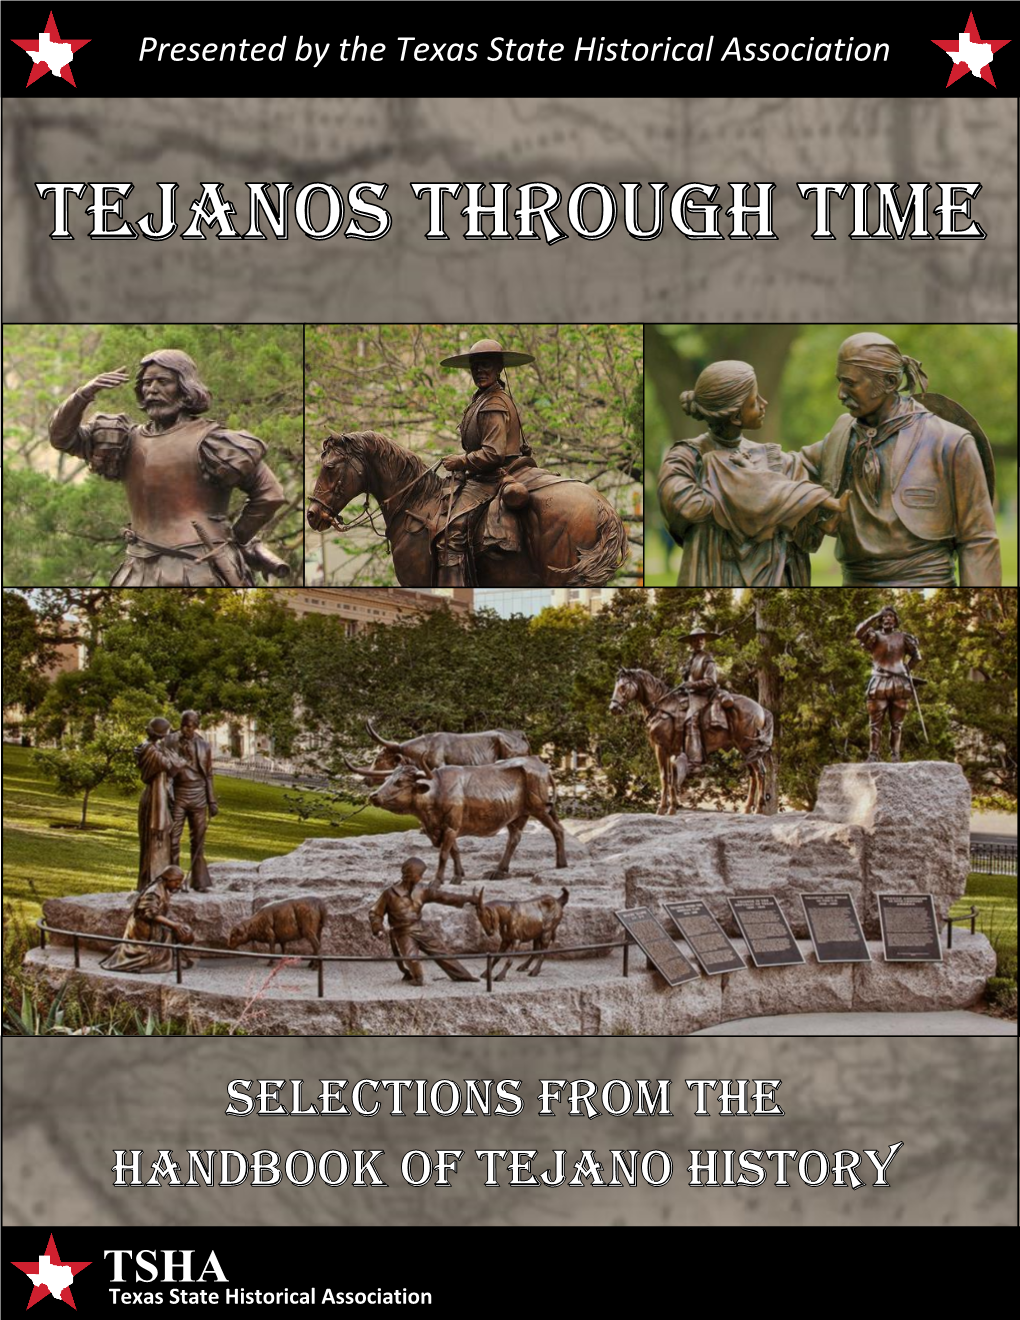 Presented by the Texas State Historical Association